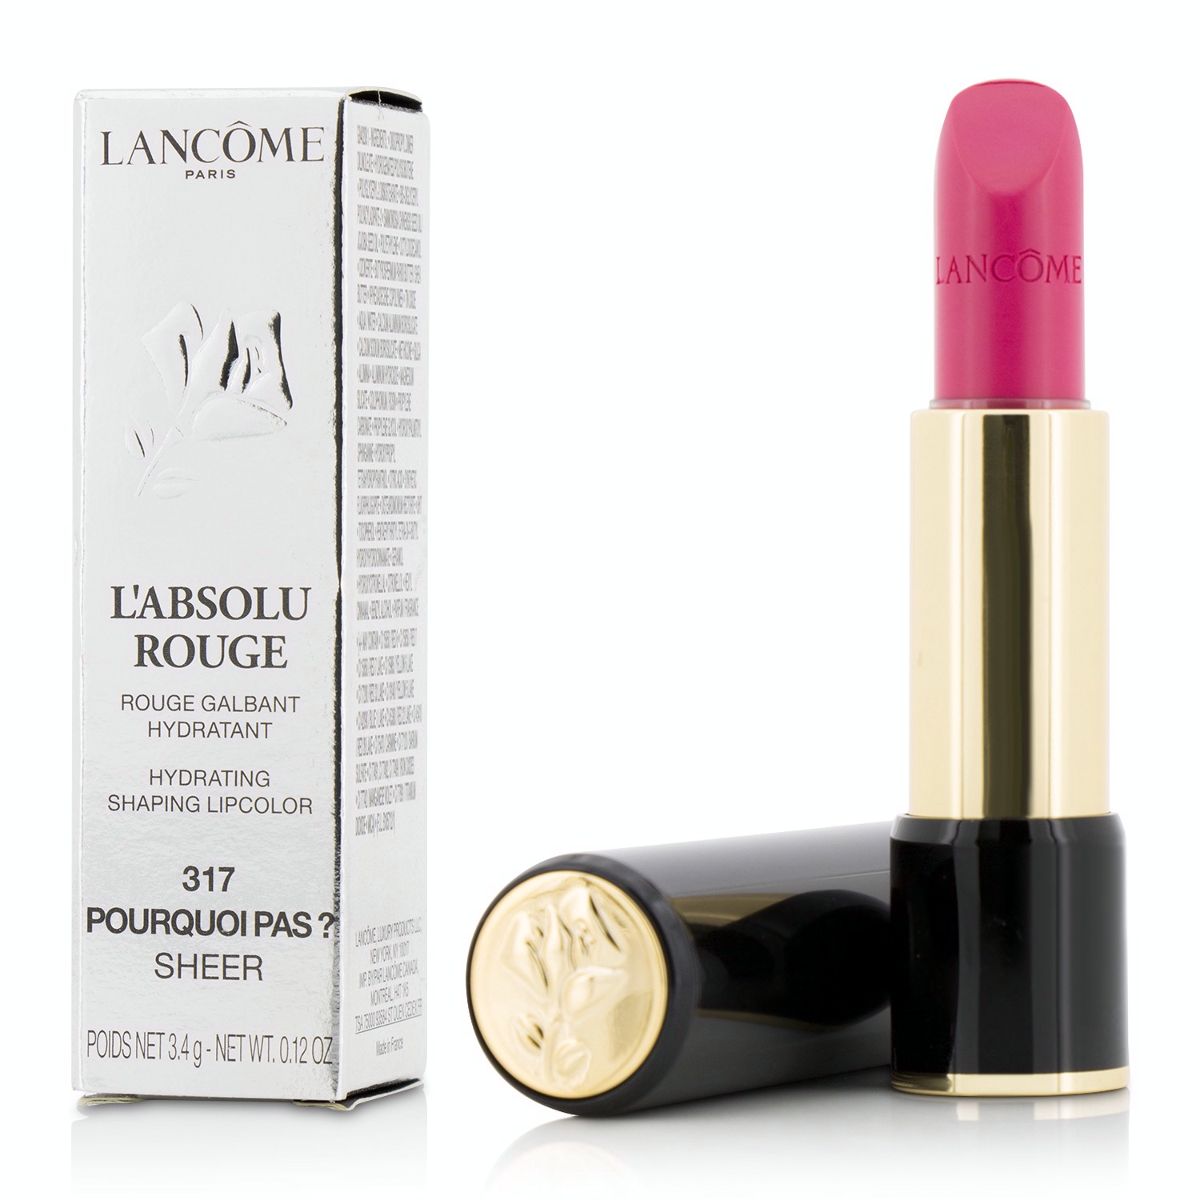 L Absolu Rouge Hydrating Shaping Lipcolor - # 317 Pourquoi Pas? (Sheer) Lancome Image